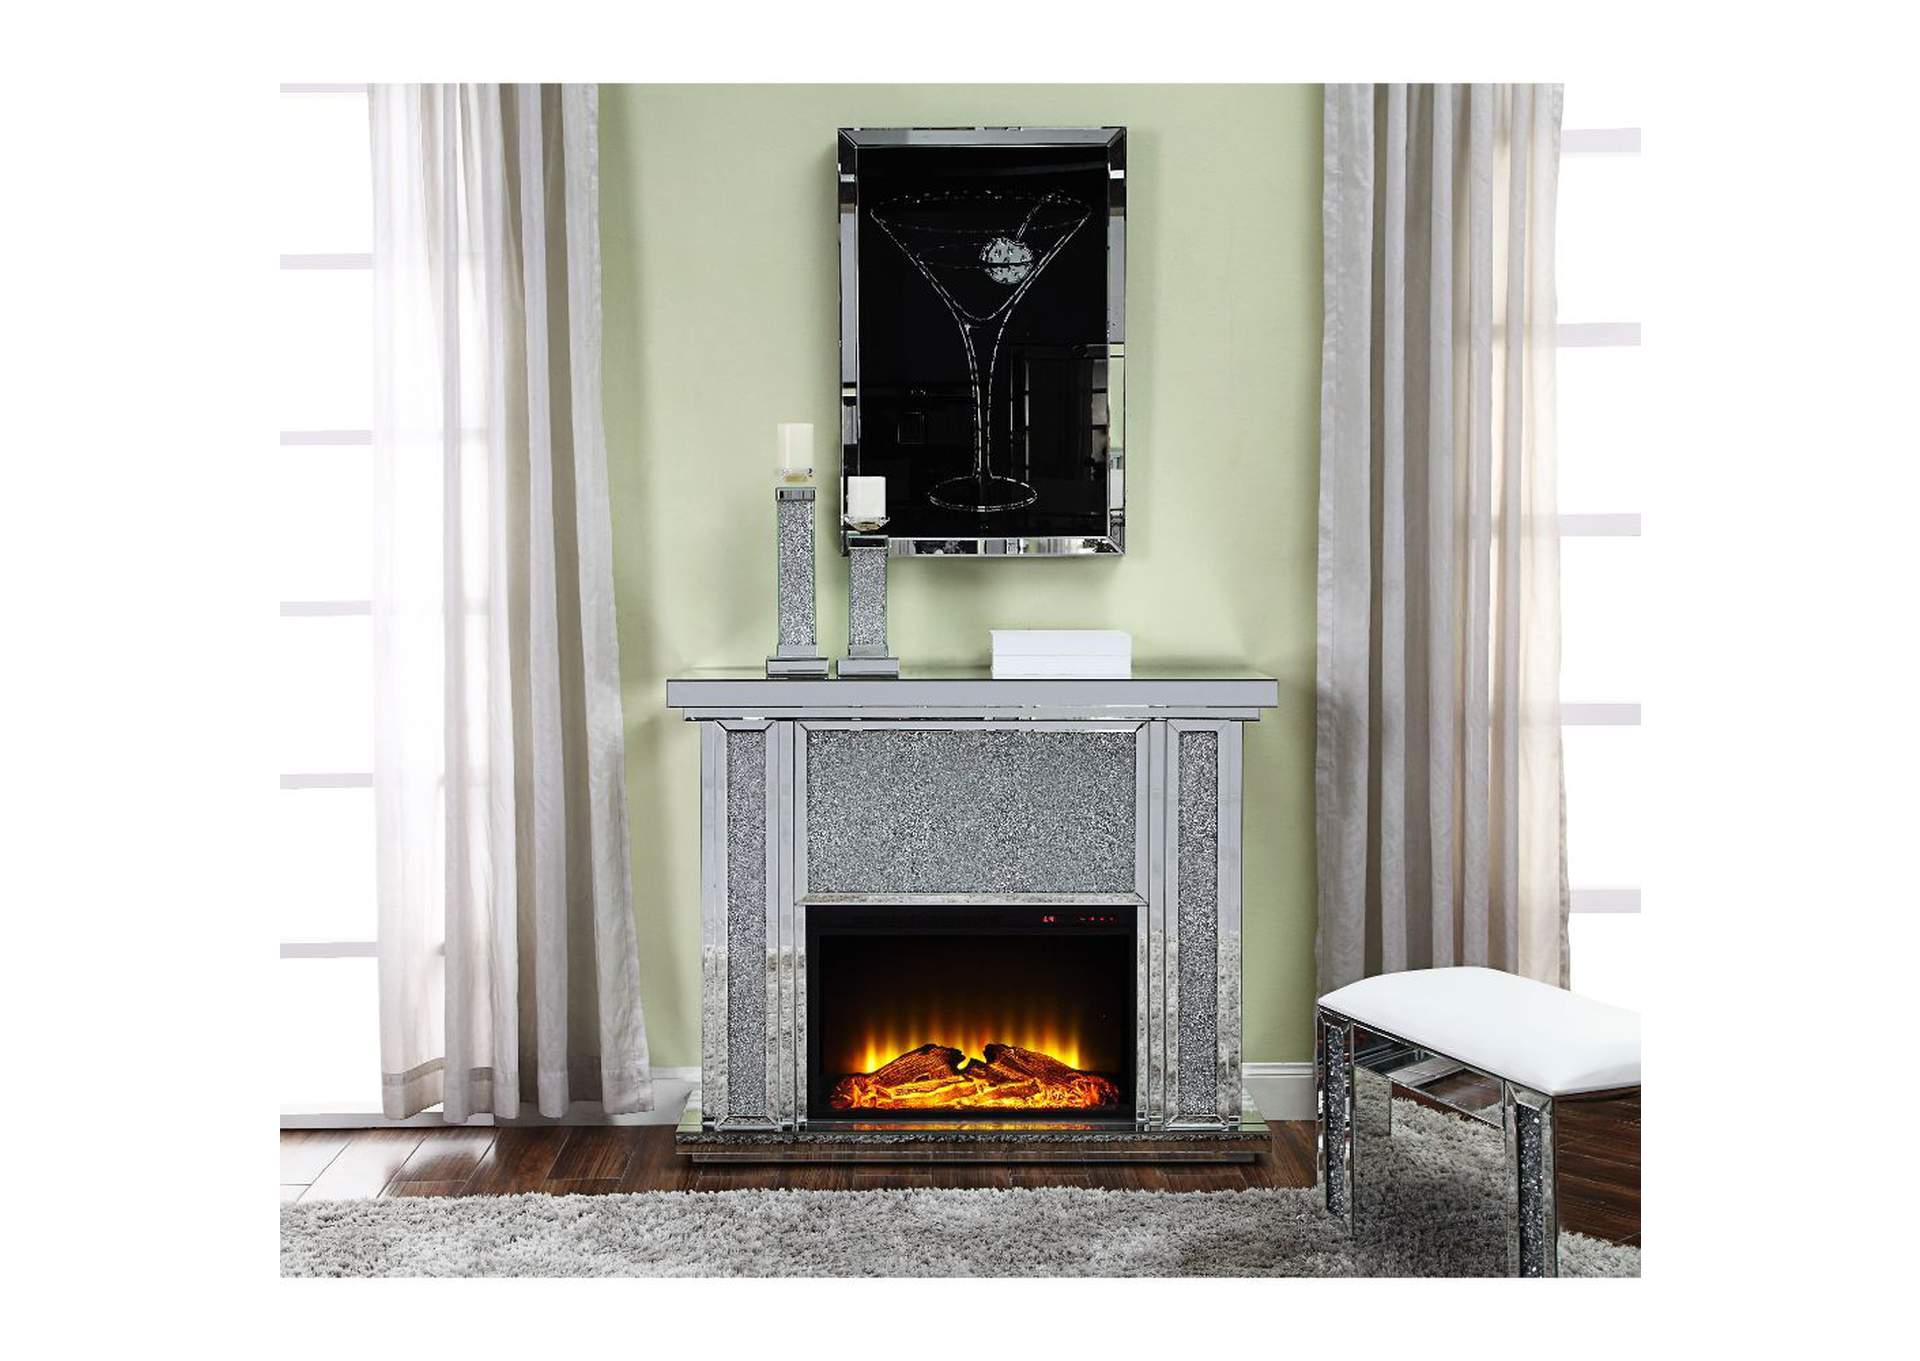 Nowles Fireplace,Acme